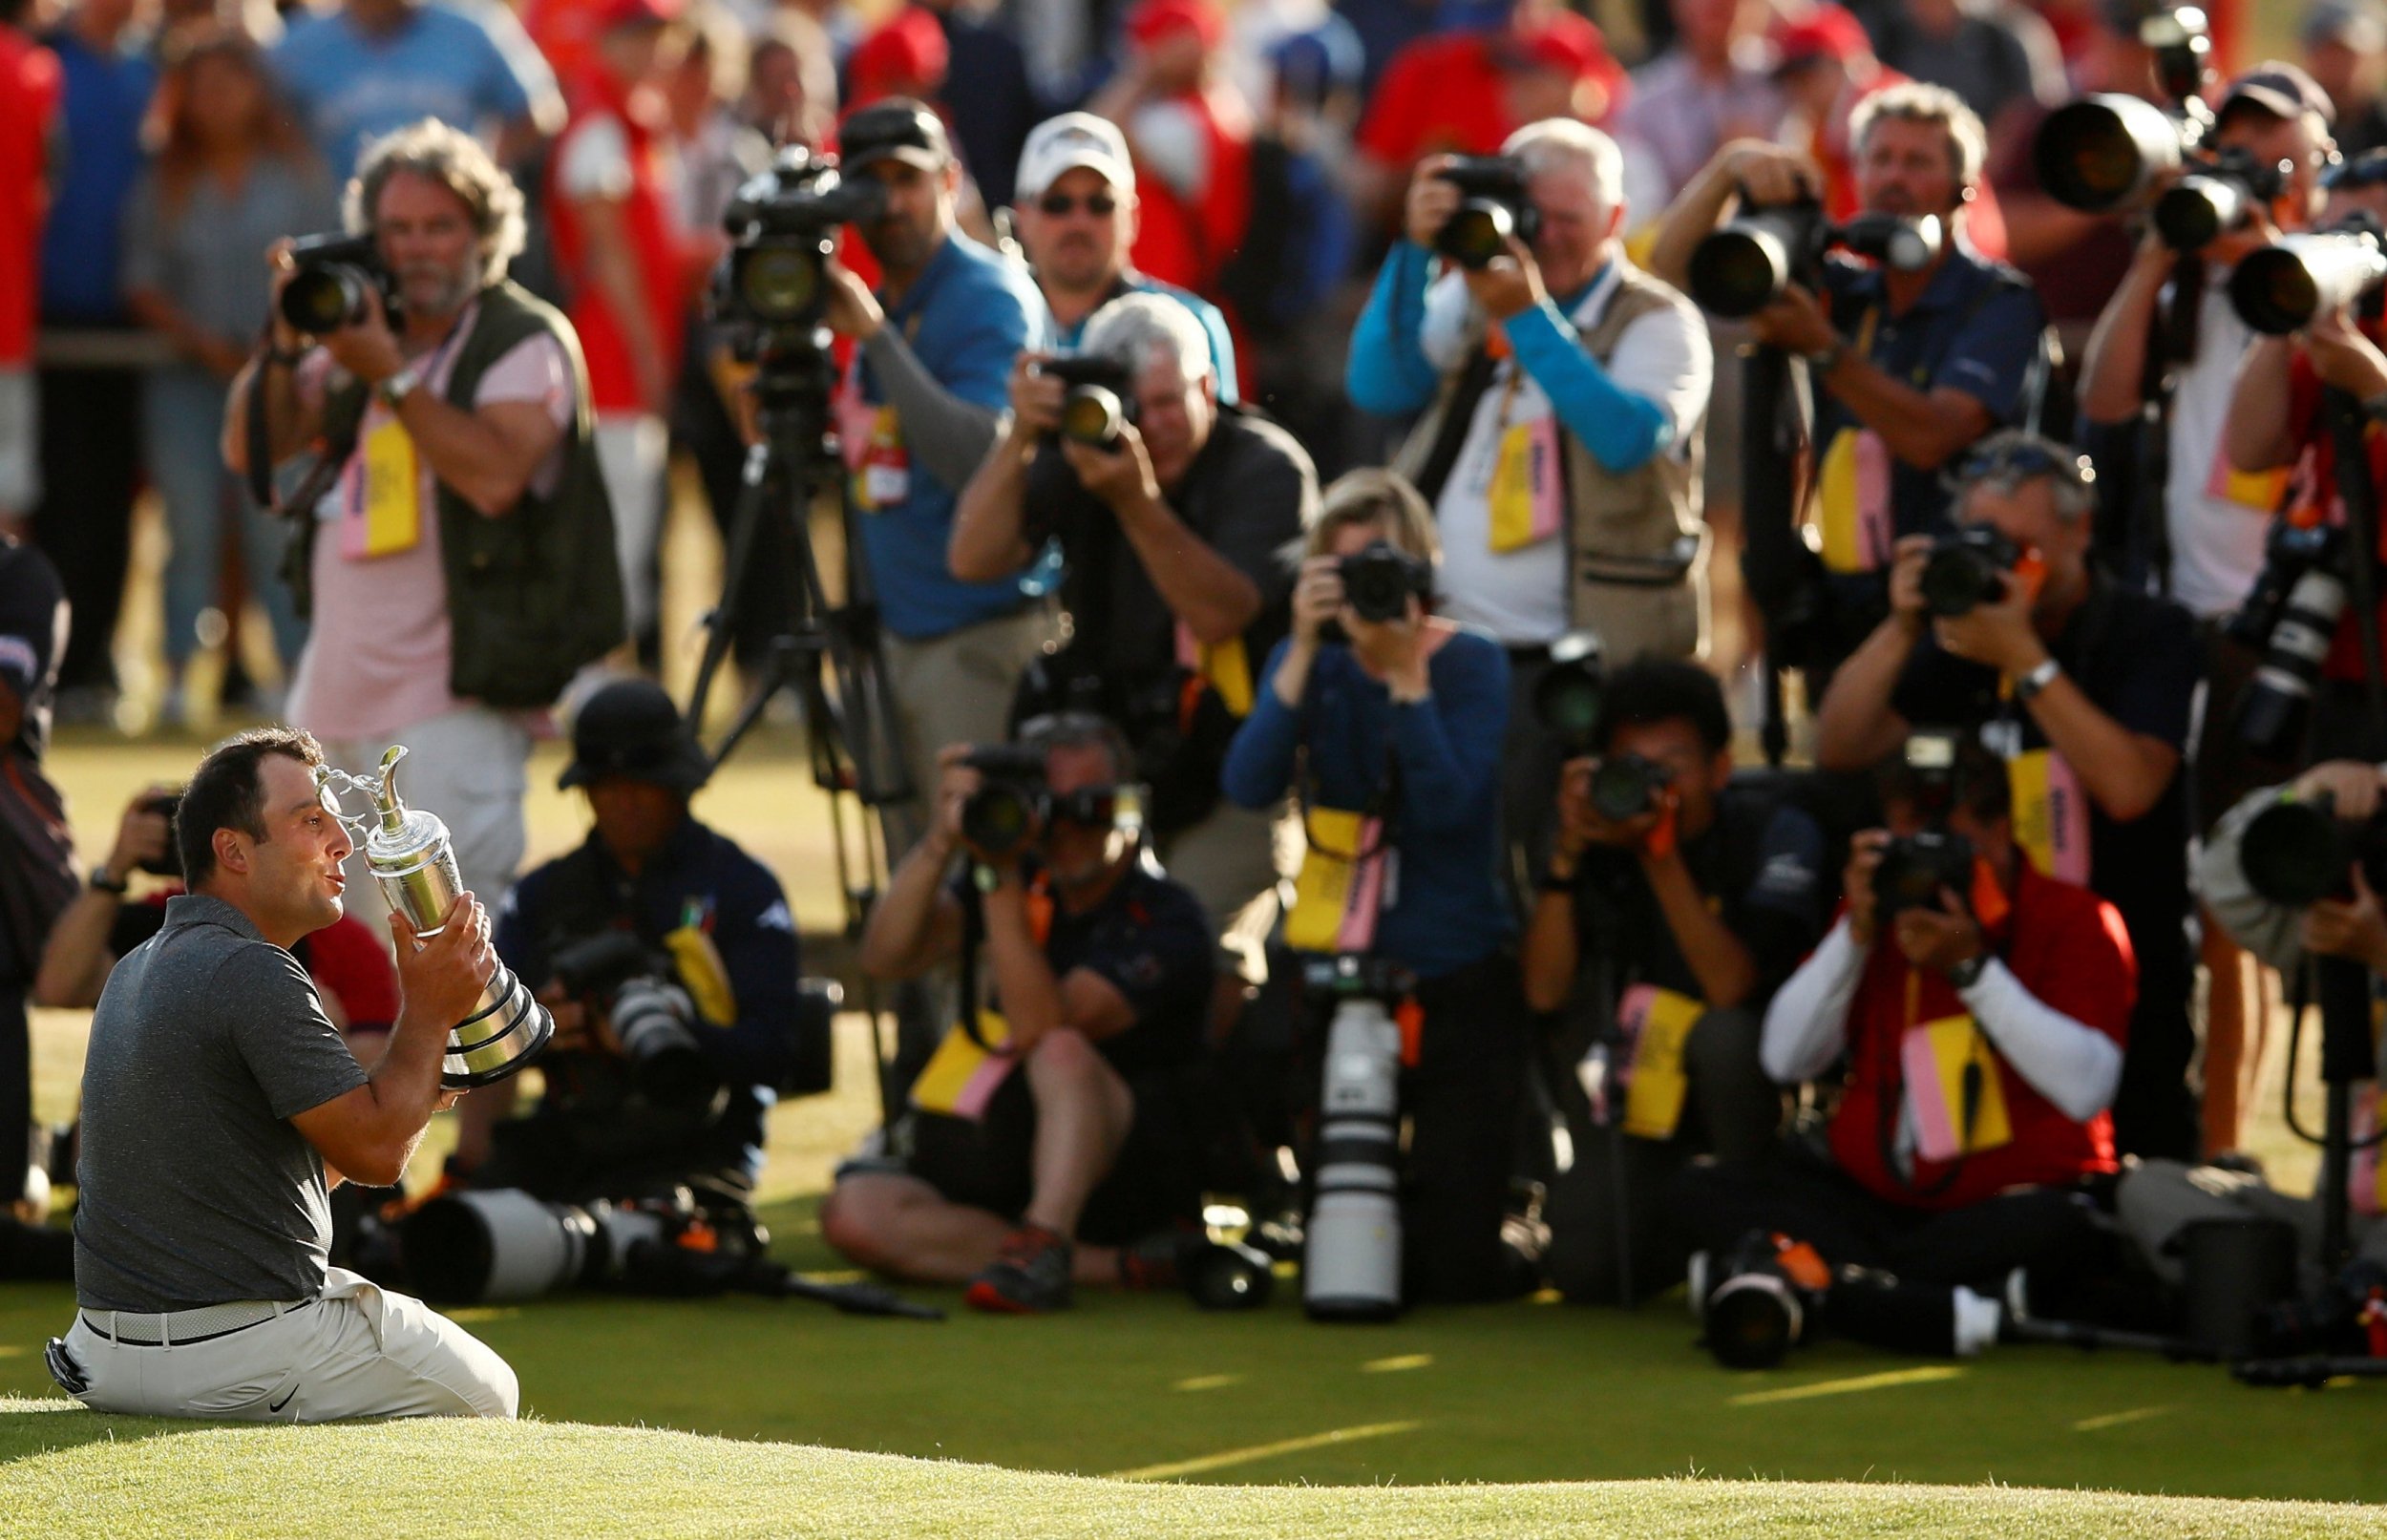 Open viewing figures best since 2006, claims NBC Sports, Golf Channel